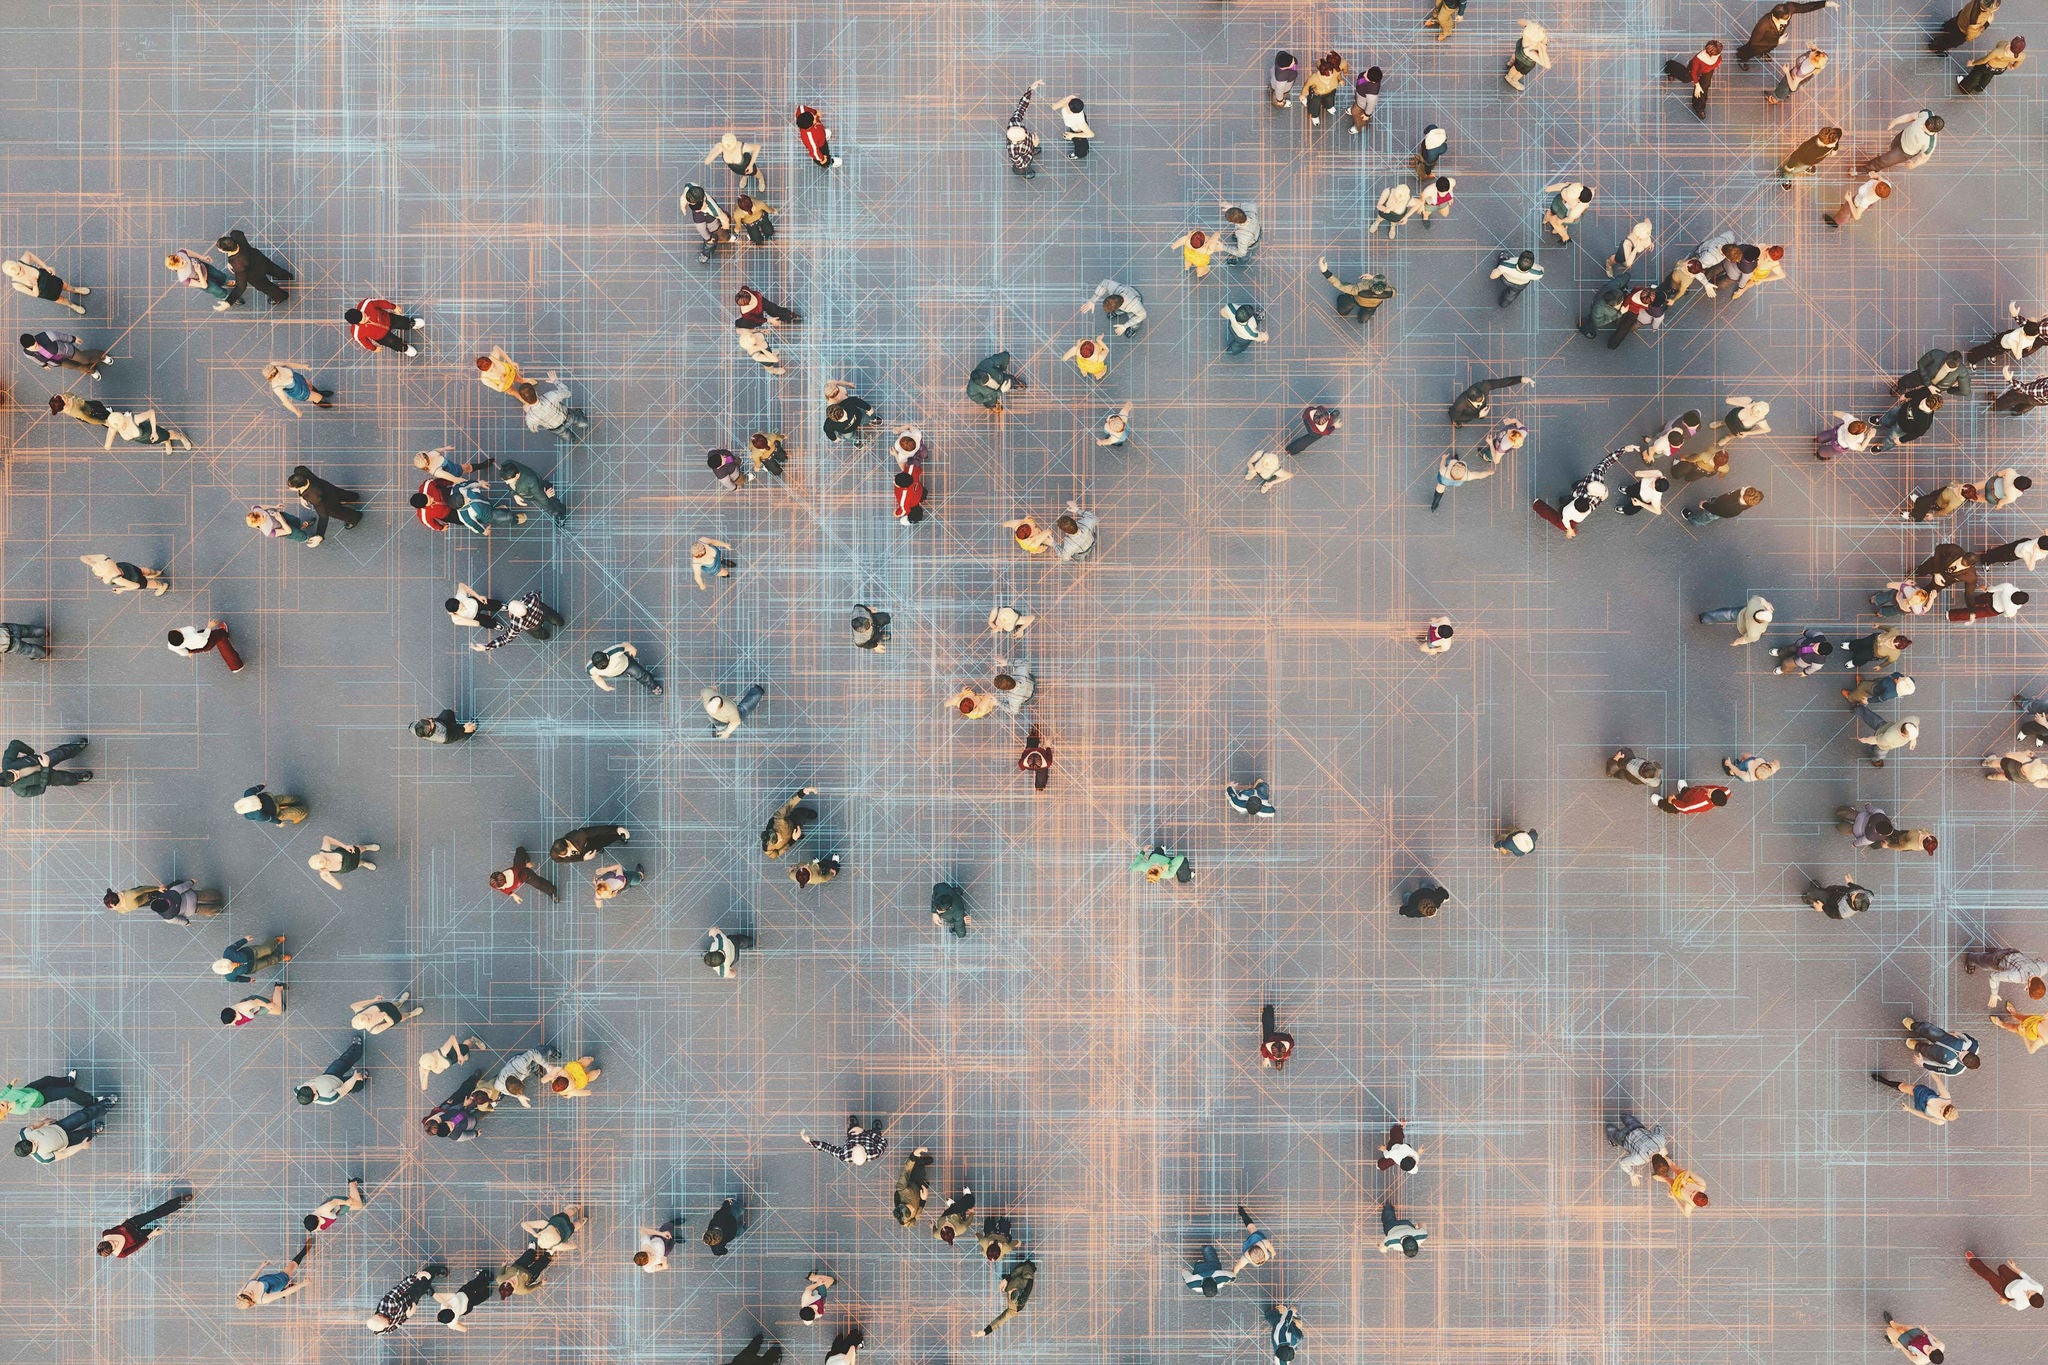 Abstract crowds of people with virtual reality street display. This is entirely 3D generated image.